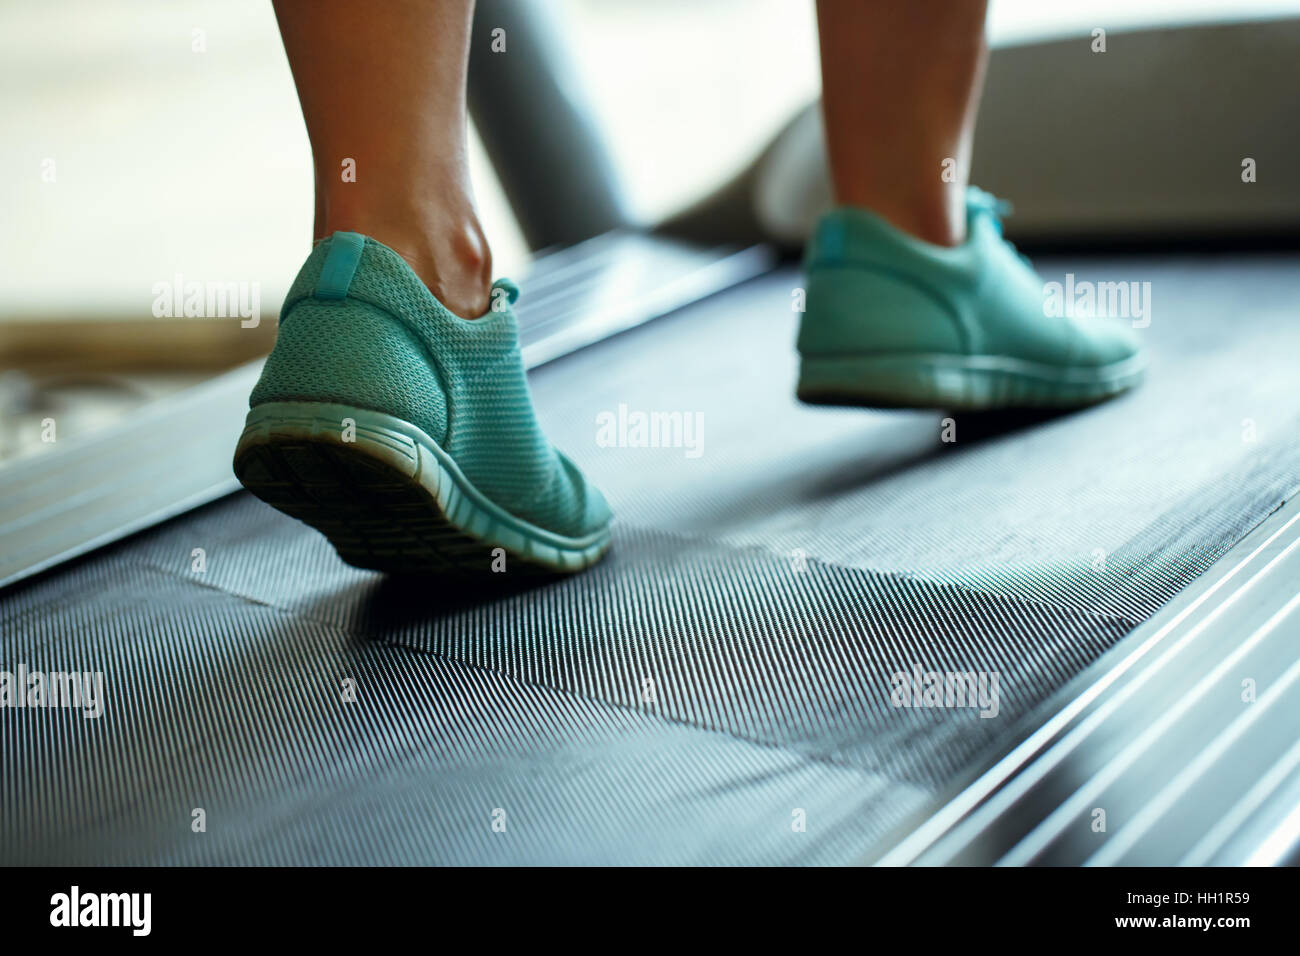 Pied de woman running on treadmill in gym Banque D'Images